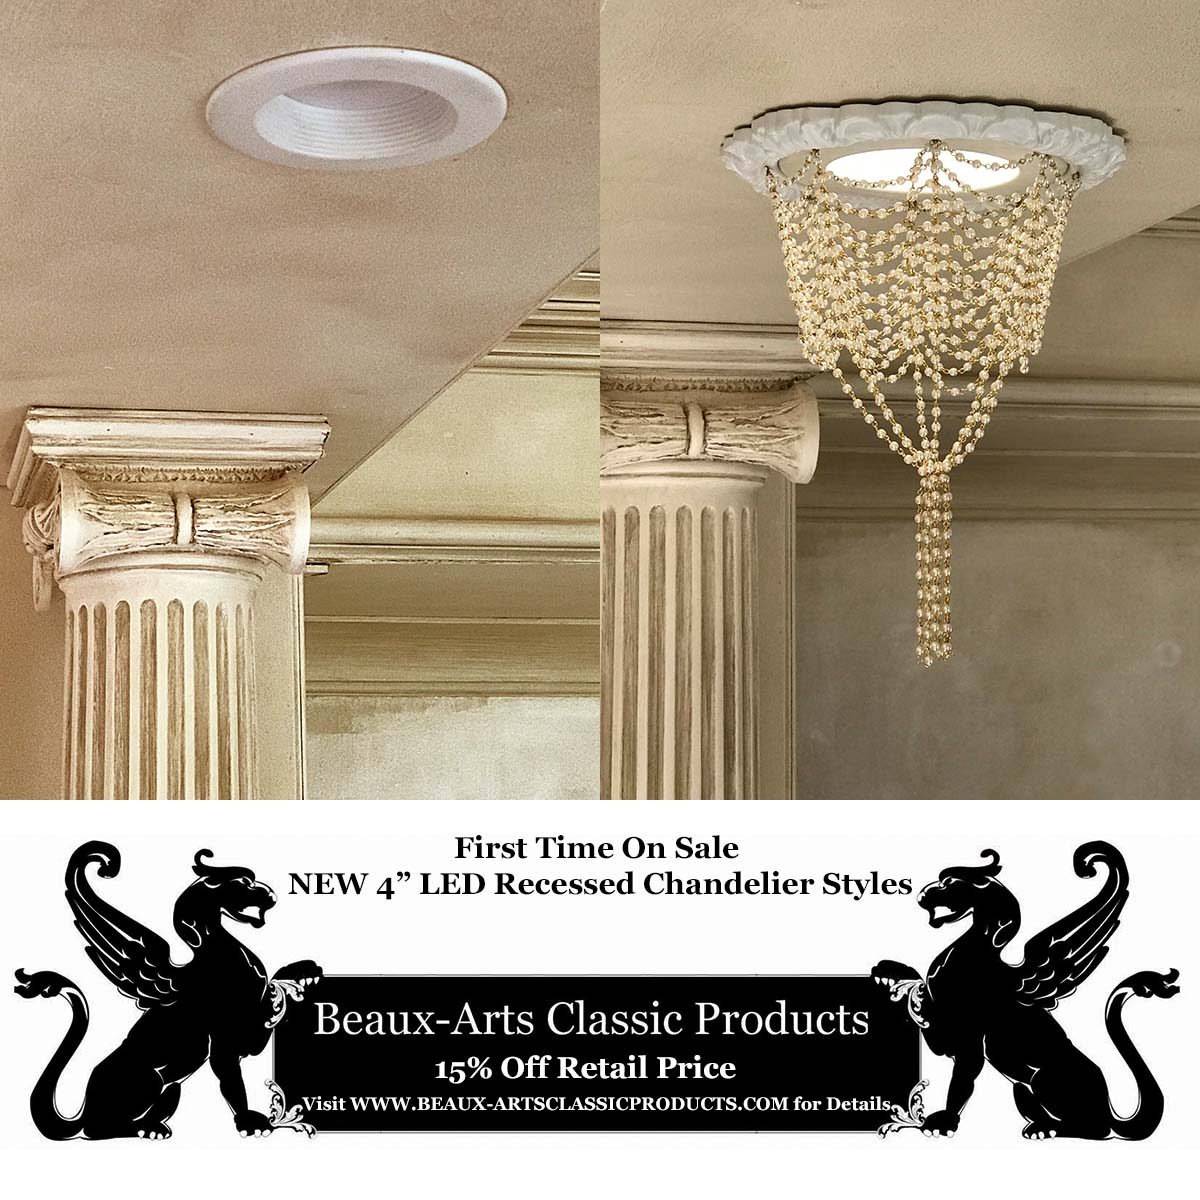 Introductory Sale 4" LED Recessed Chandelier